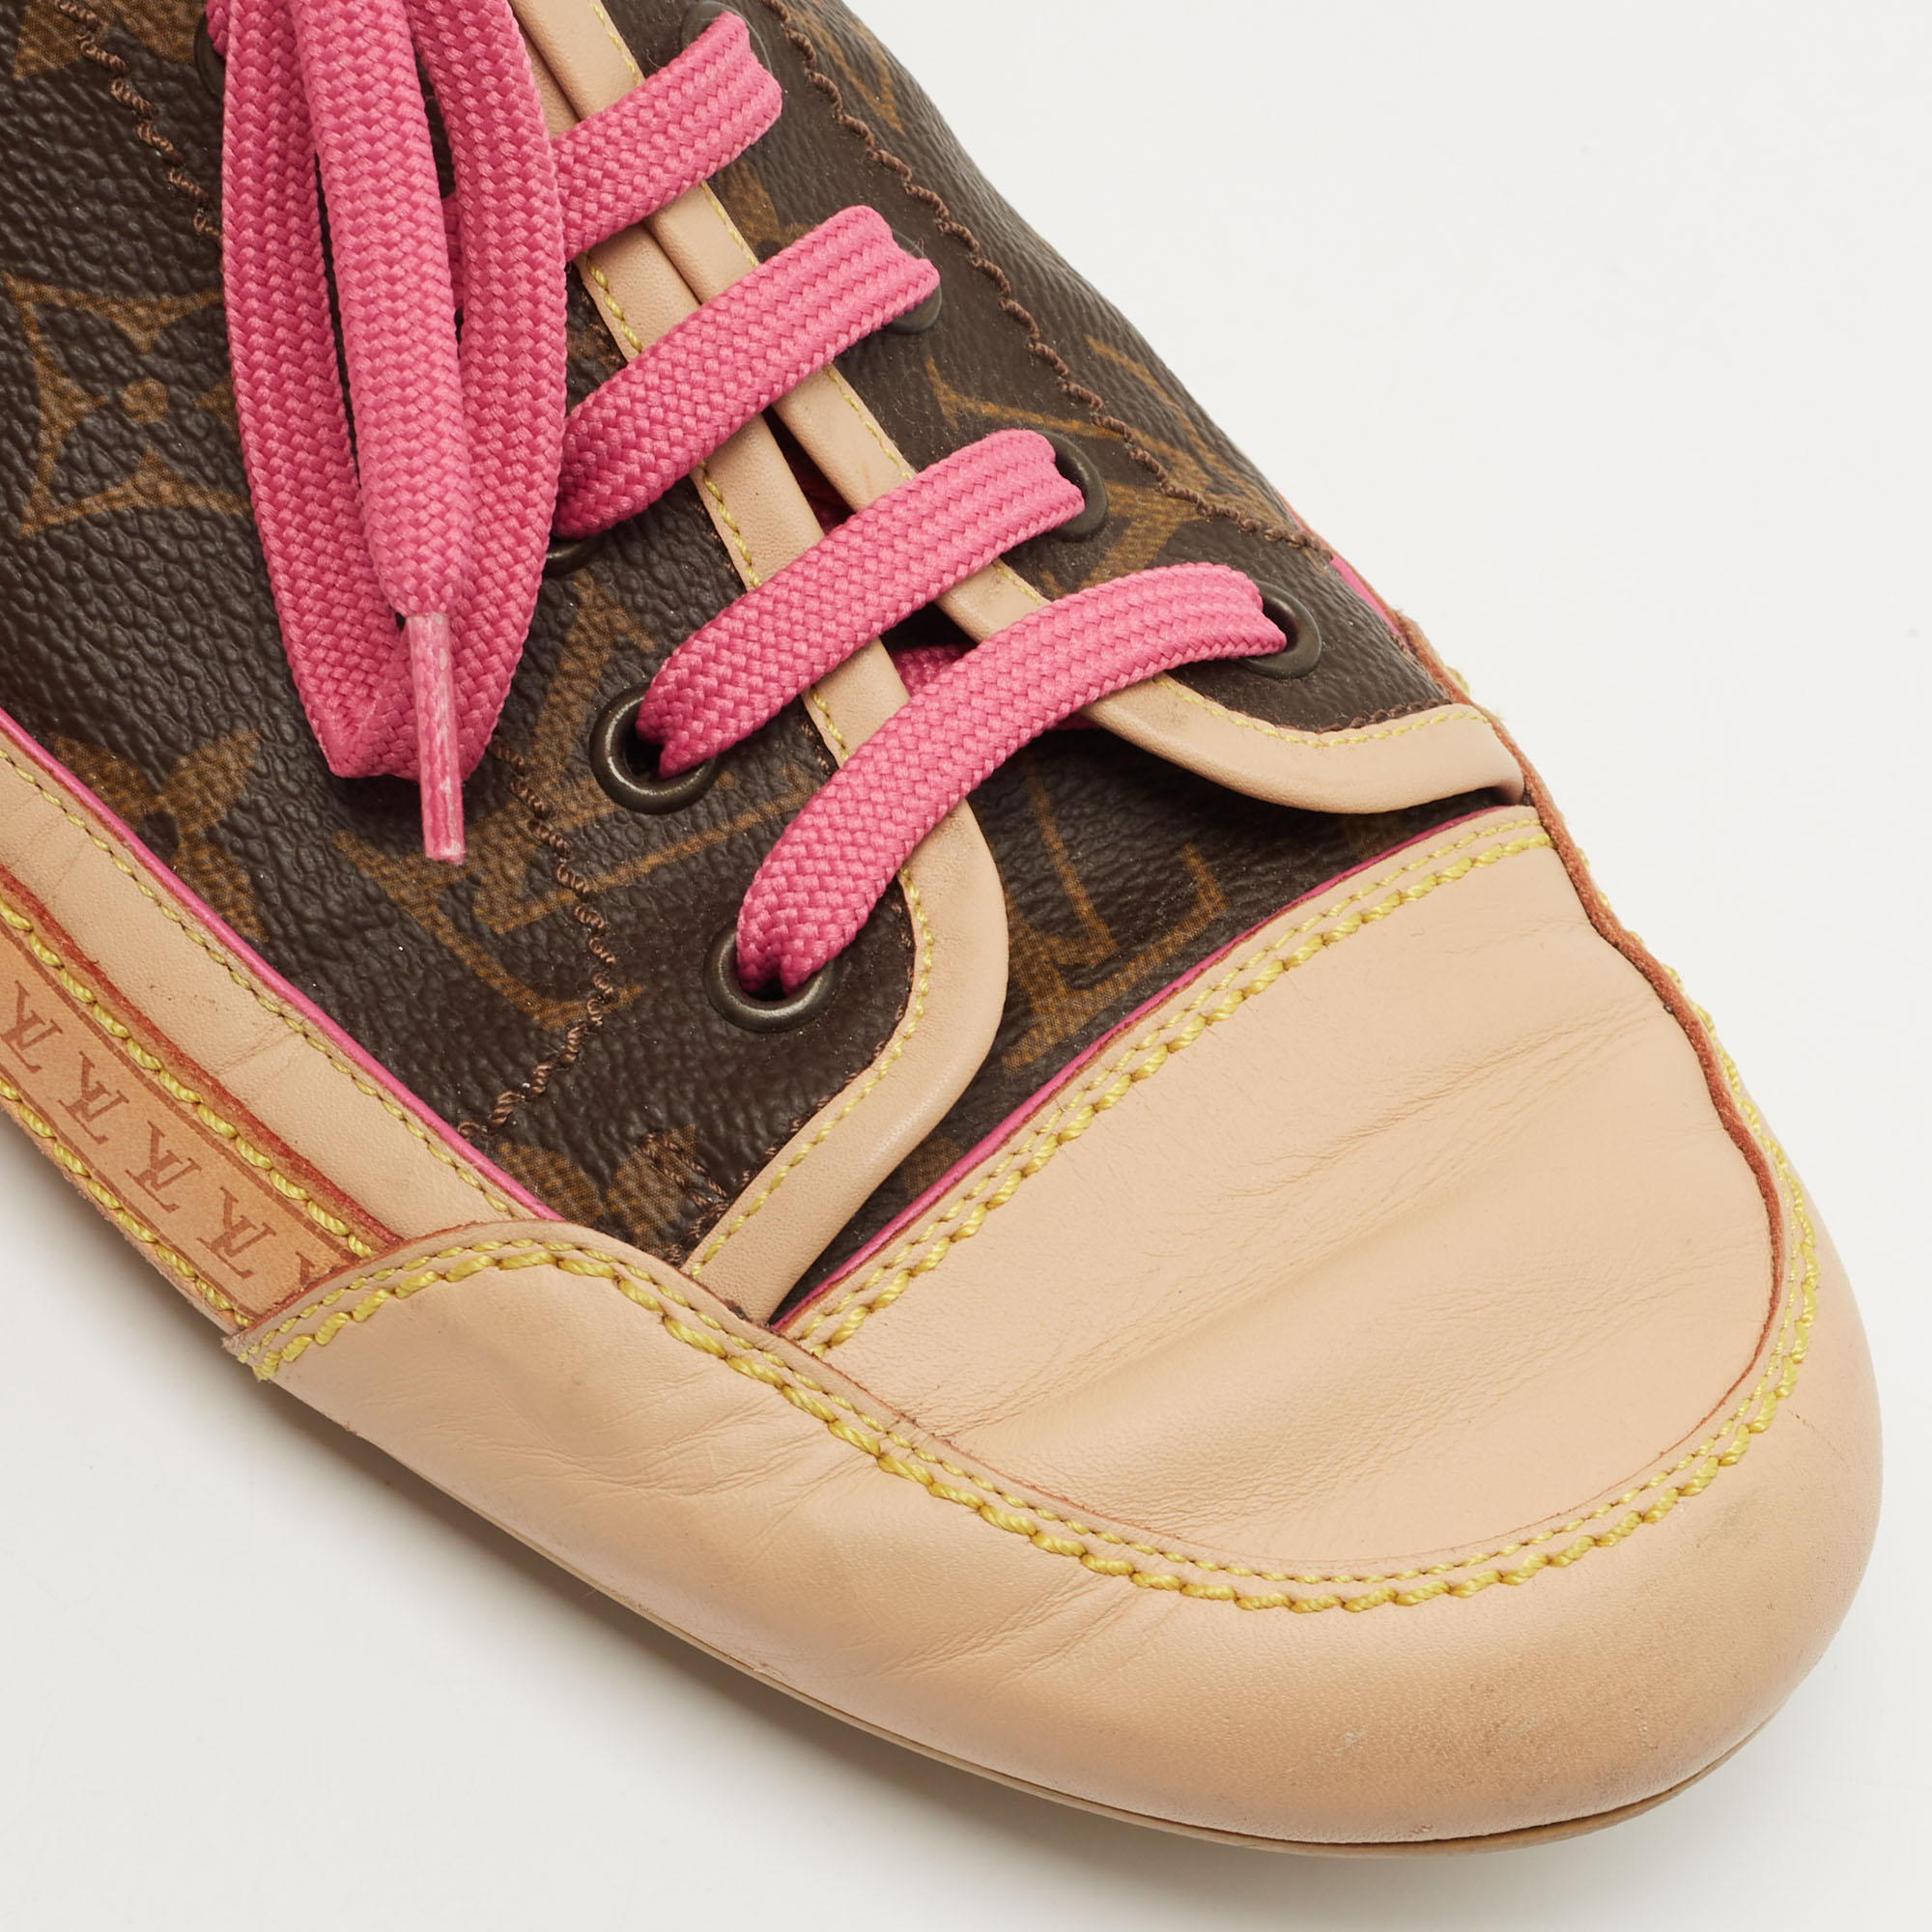 Louis Vuitton Brown Monogram Canvas and Leather Capucines Sneakers